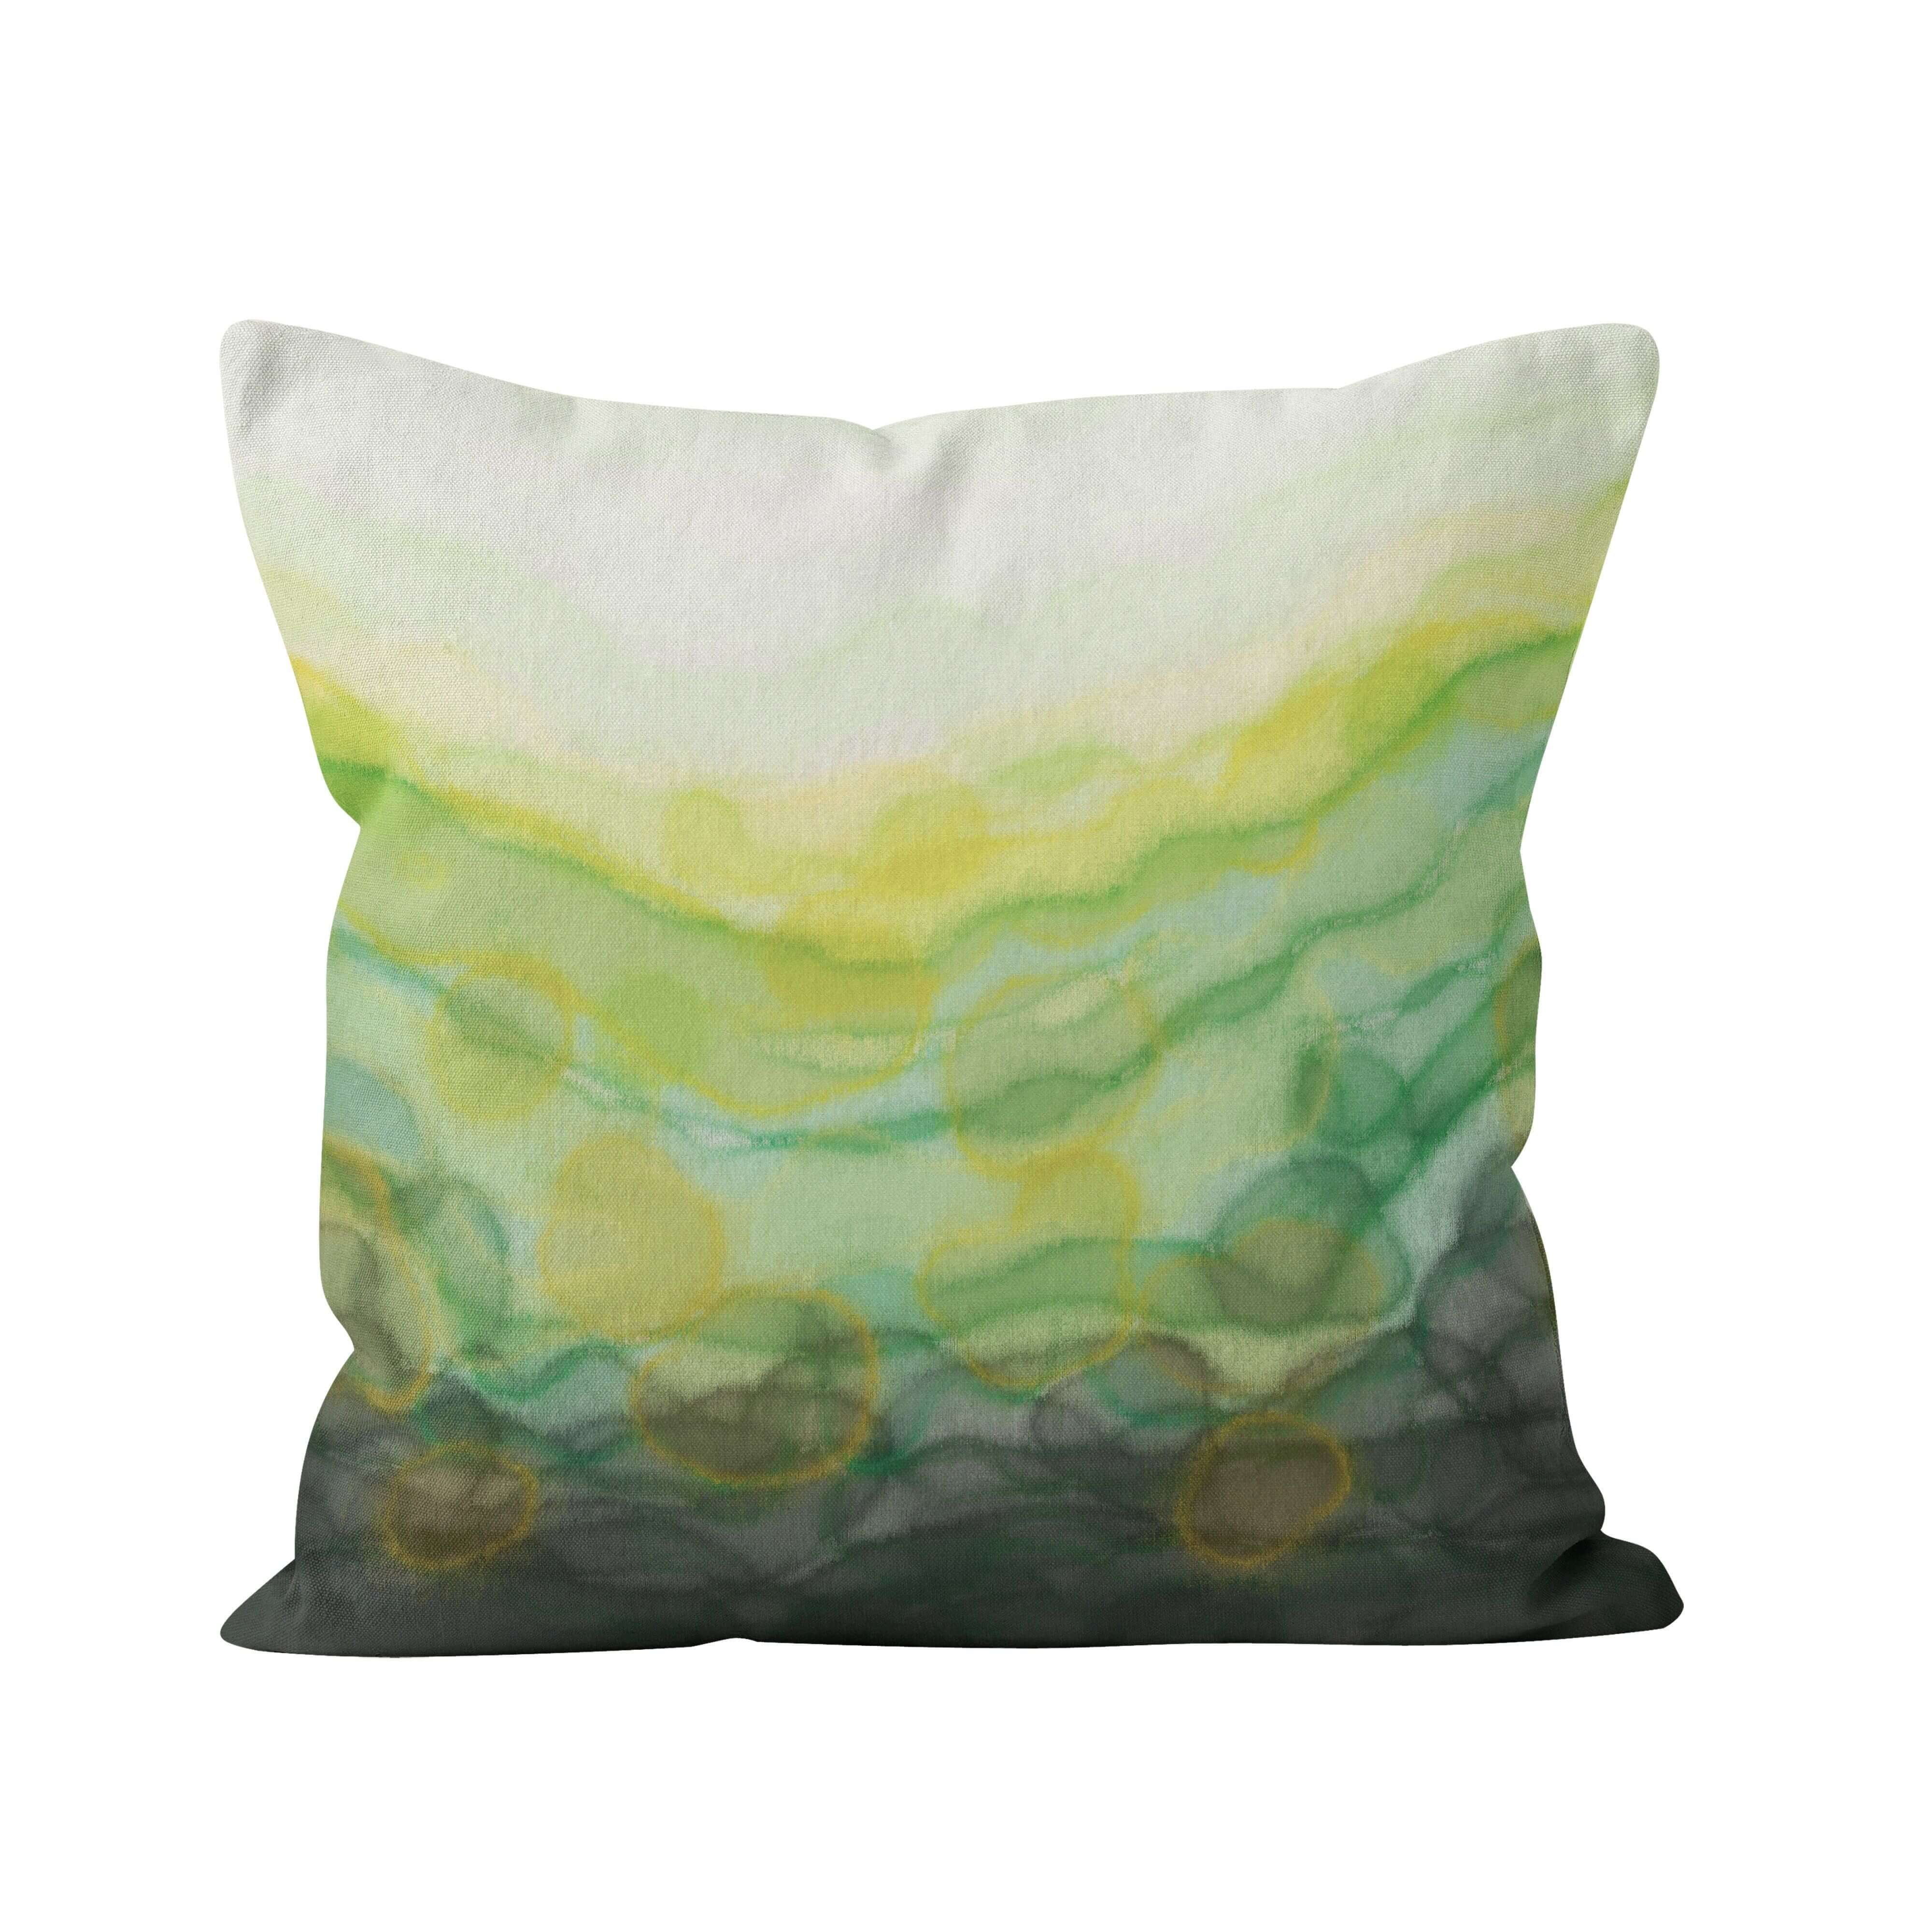 'Serenity' Green Cushion - Louise Mead